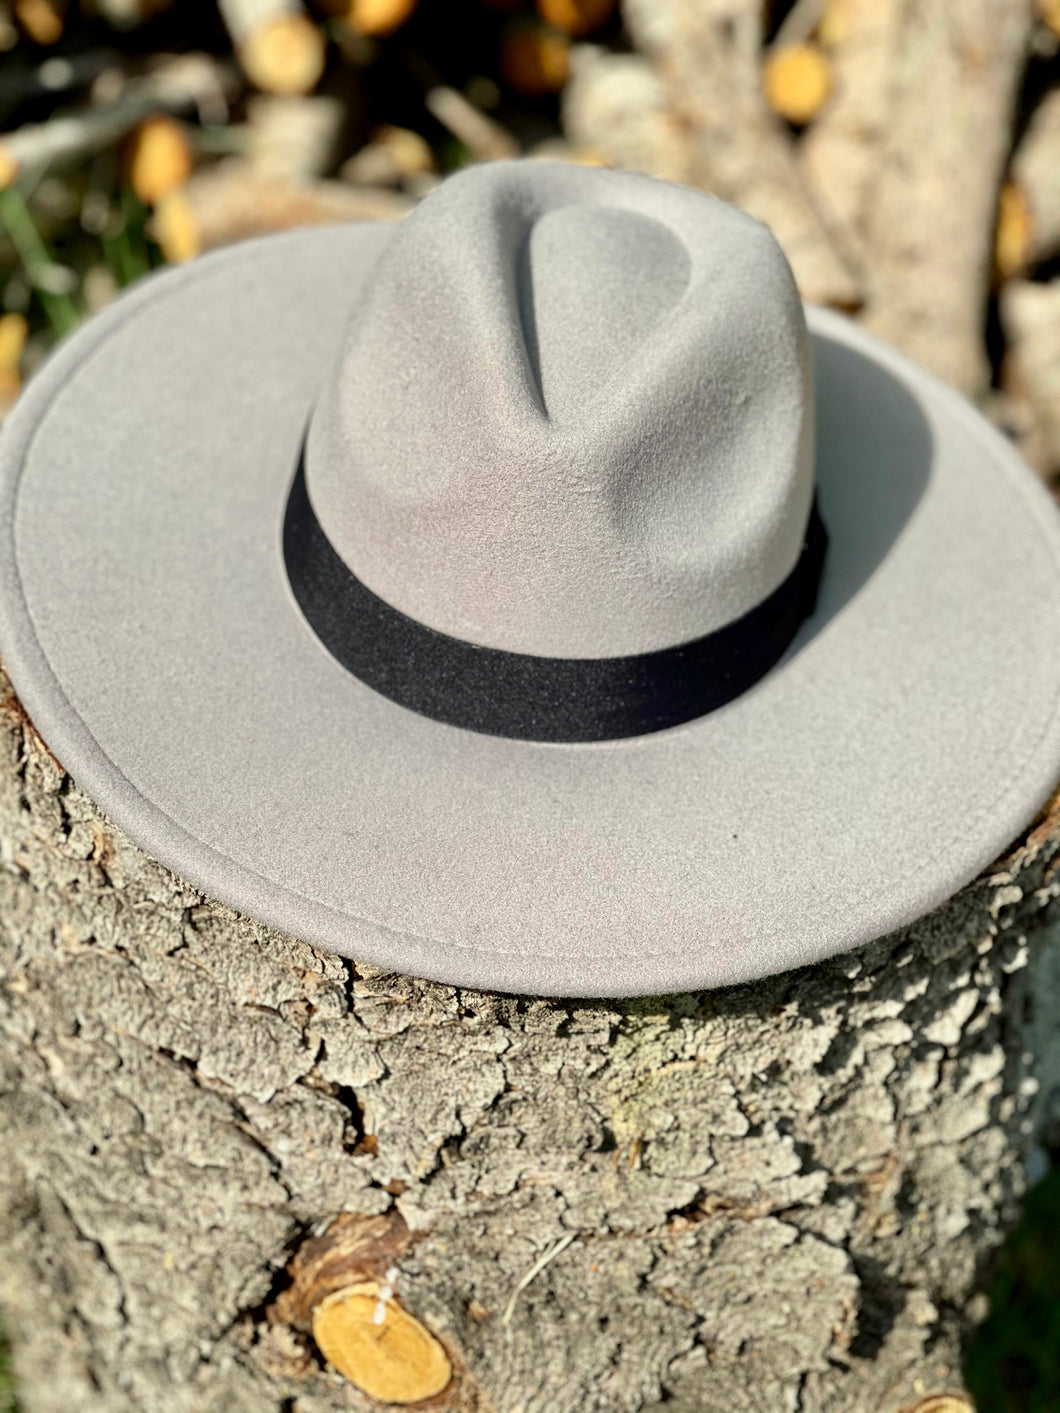 The Rancher's Hat 